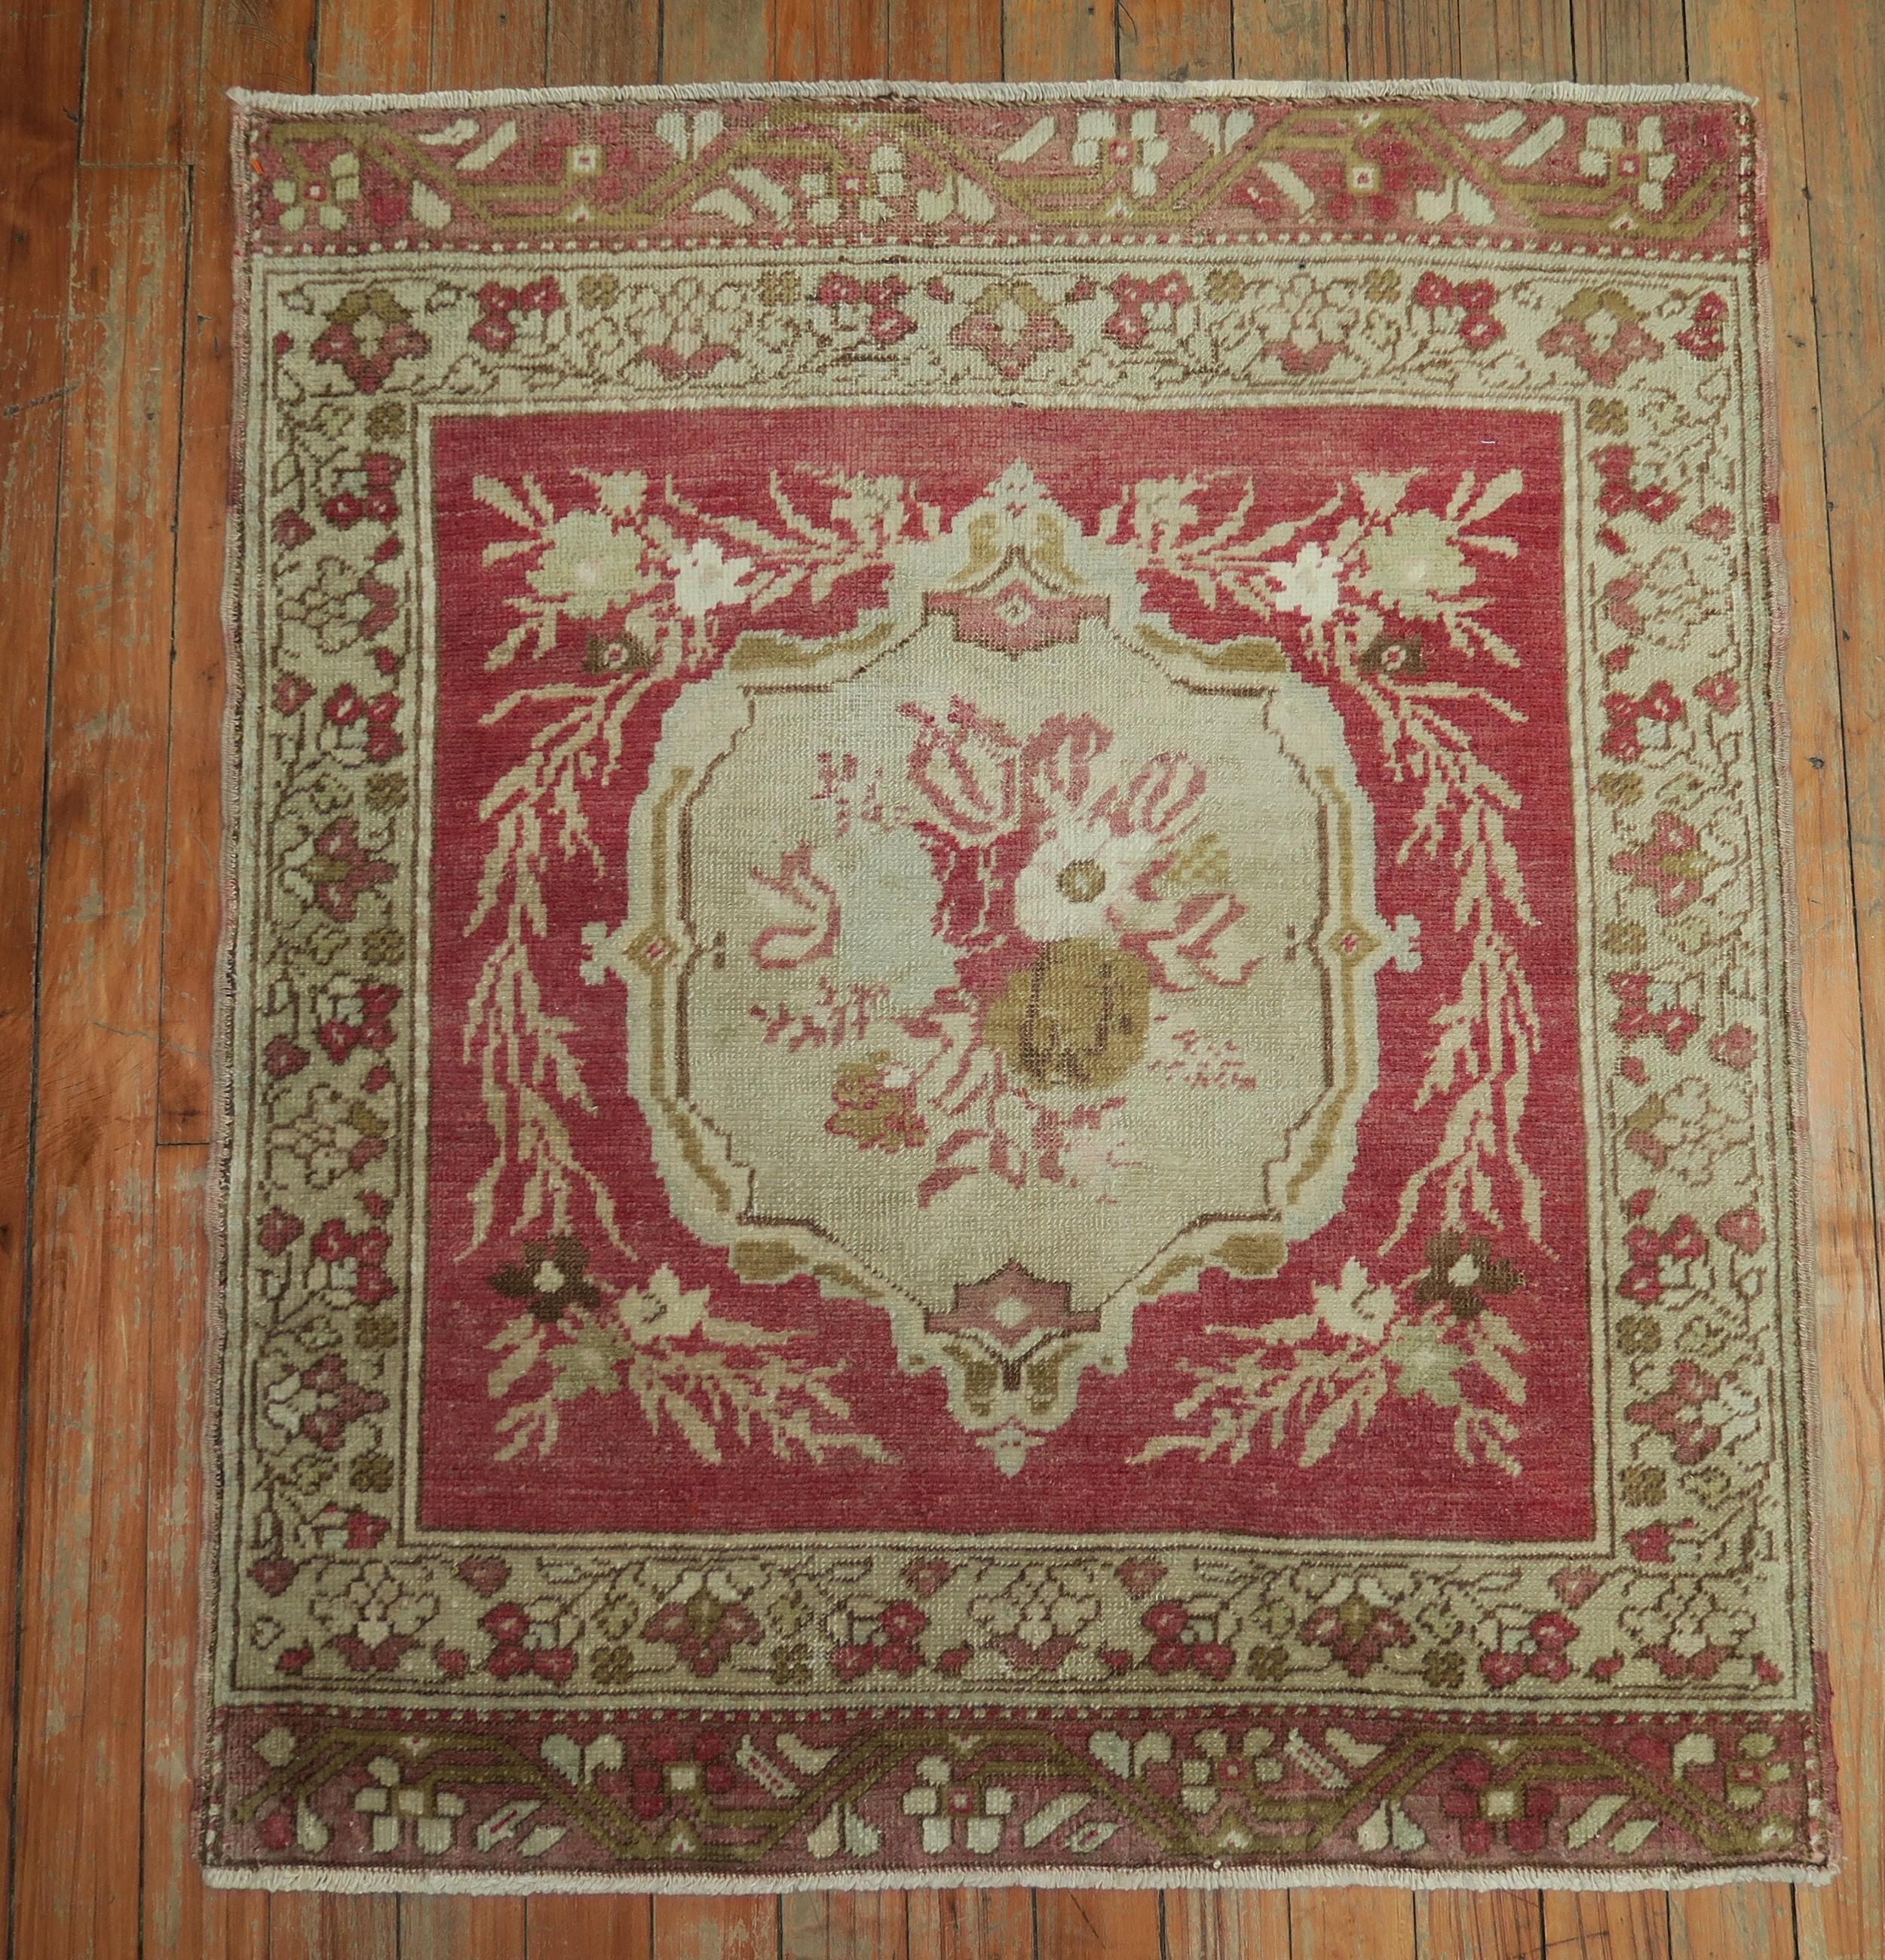 Hand-Woven Pair of 20th century Red Rose Turkish Sivas Floral Rugs